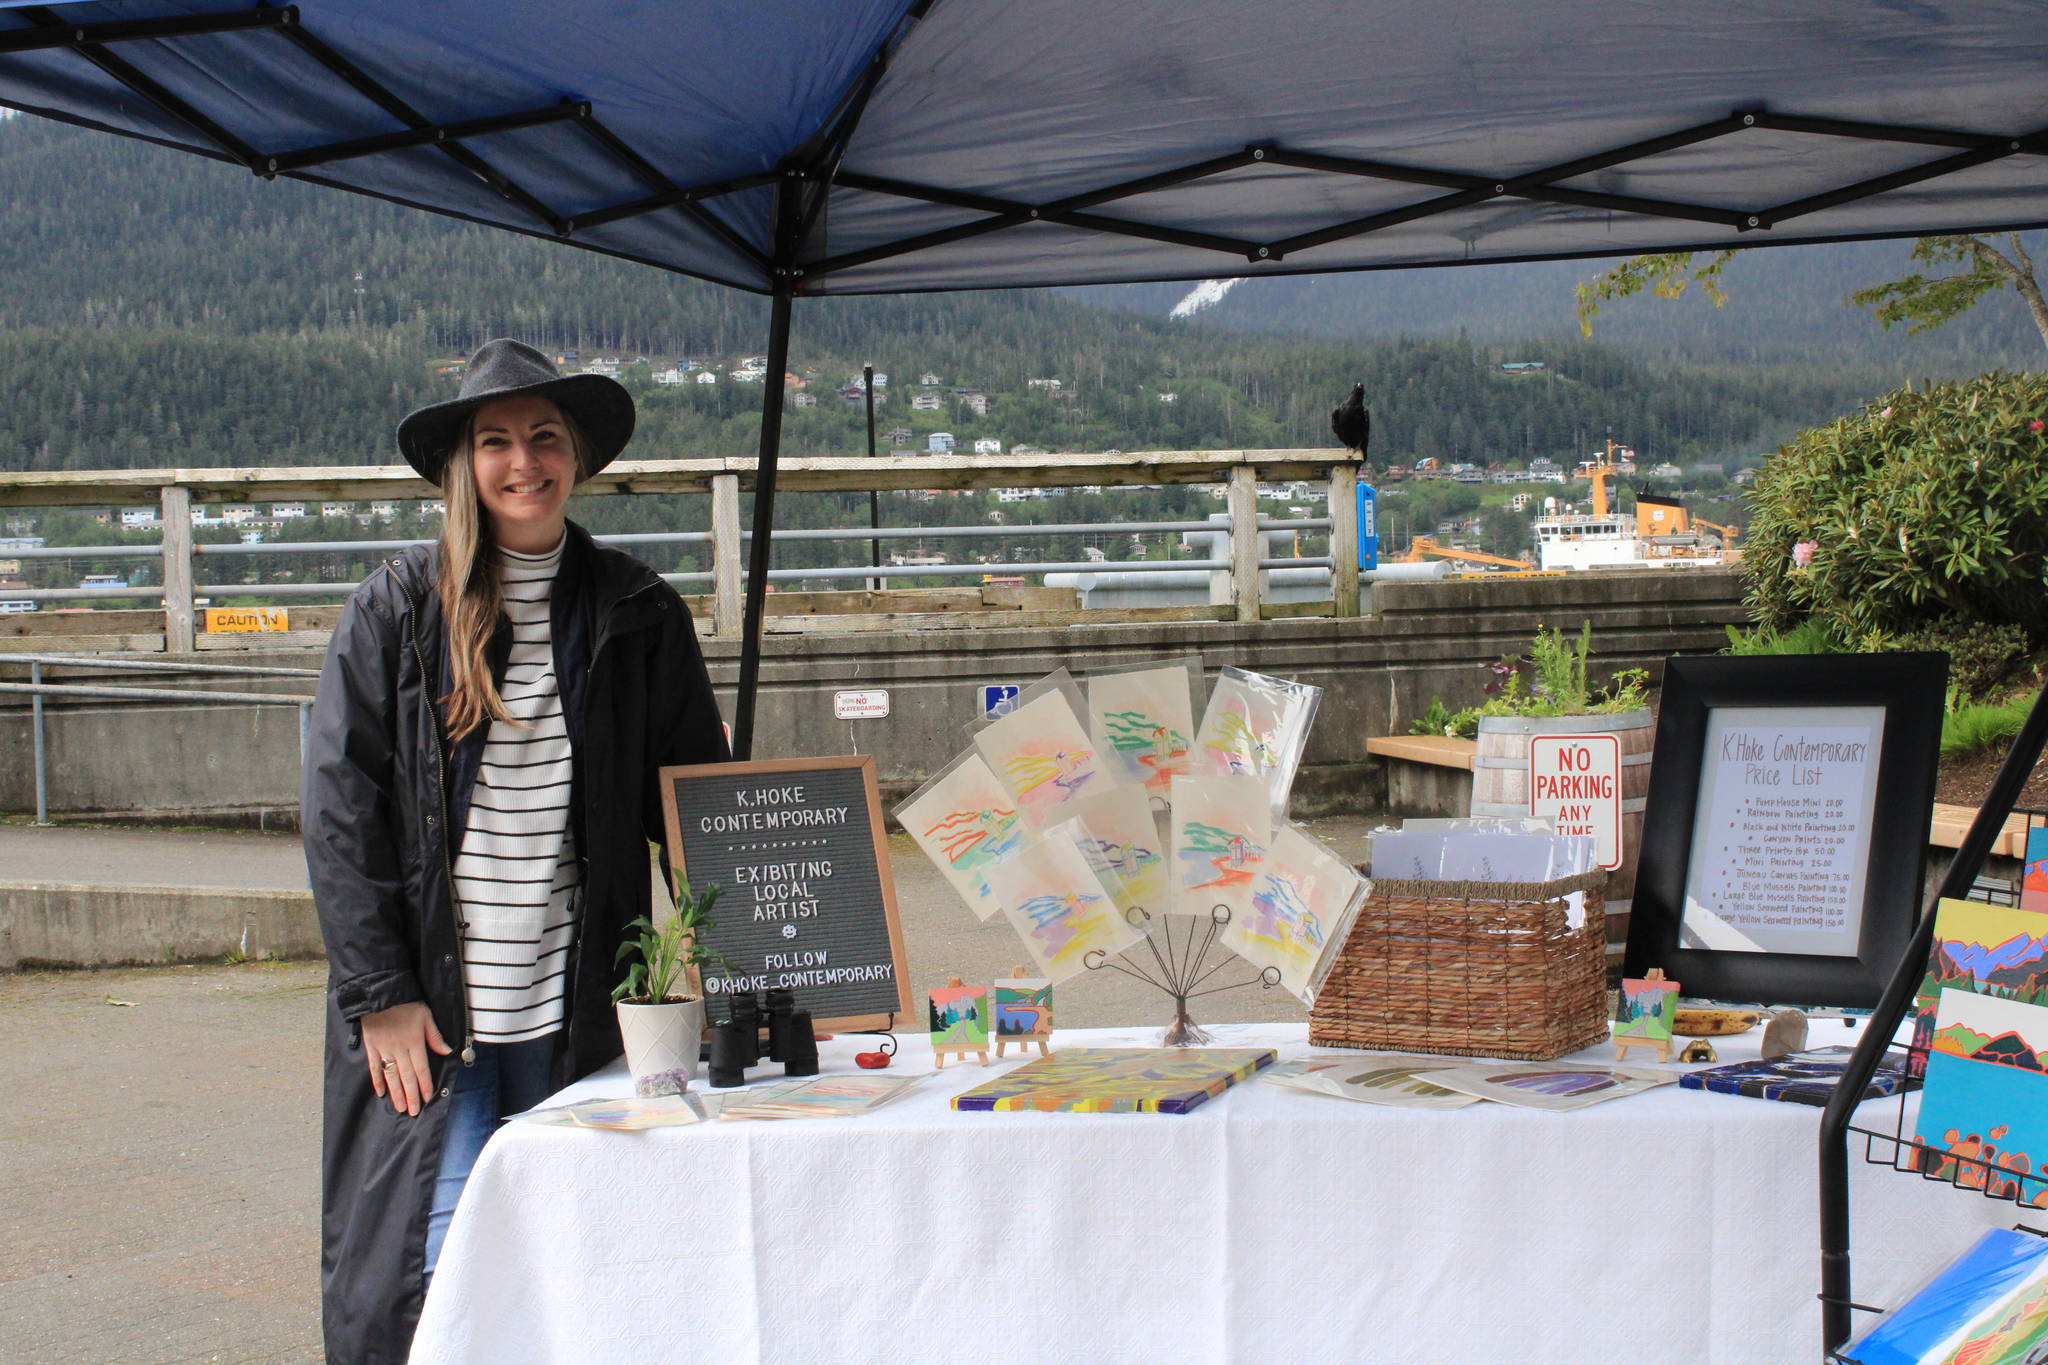 Vendors and shoppers met under misty skies on Saturday, June 5, at the Fresh Air Market, sponsored by the Juneau Arts and Humanities Council. The event marked one of the first community events of the summer season after COVID-19 forced the cancelation of many events in 2020. Vendor Kelsey Hoke Martin said that about 20 people had stopped by her booth in the first half-hour of business. (Dana Zigmund/Juneau Empire)